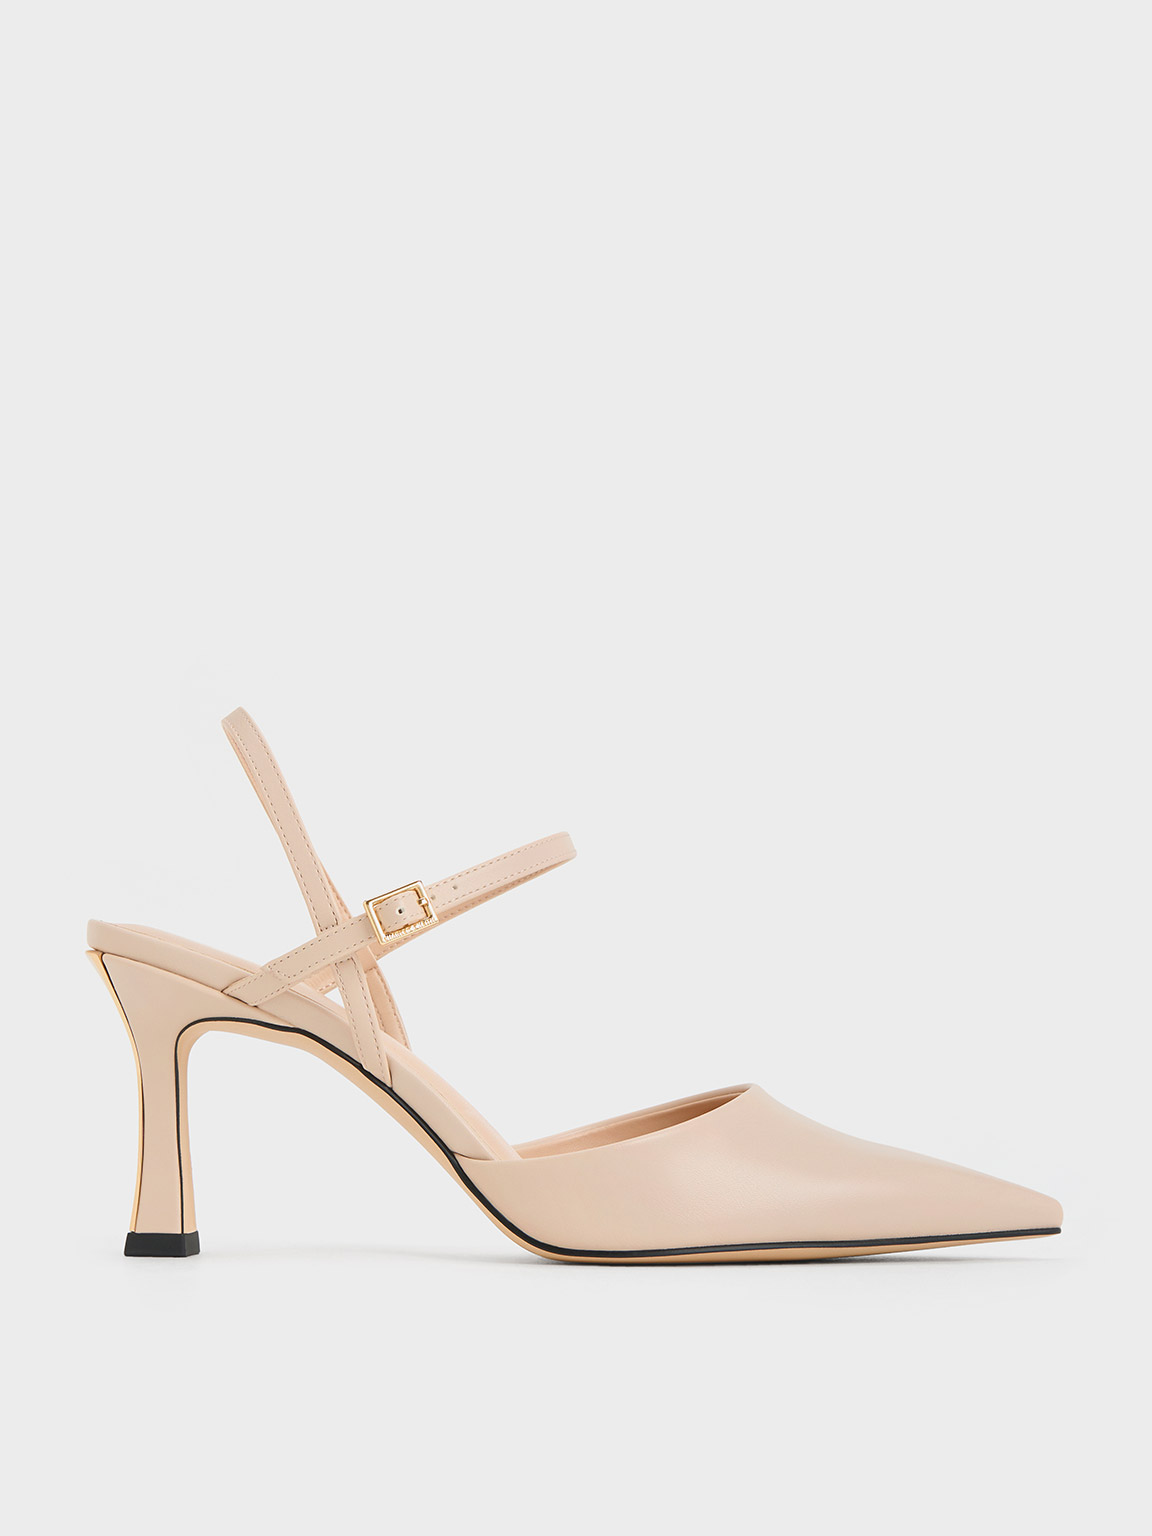 Nude Pointed-Toe Flared Heel Pumps - CHARLES & KEITH UK